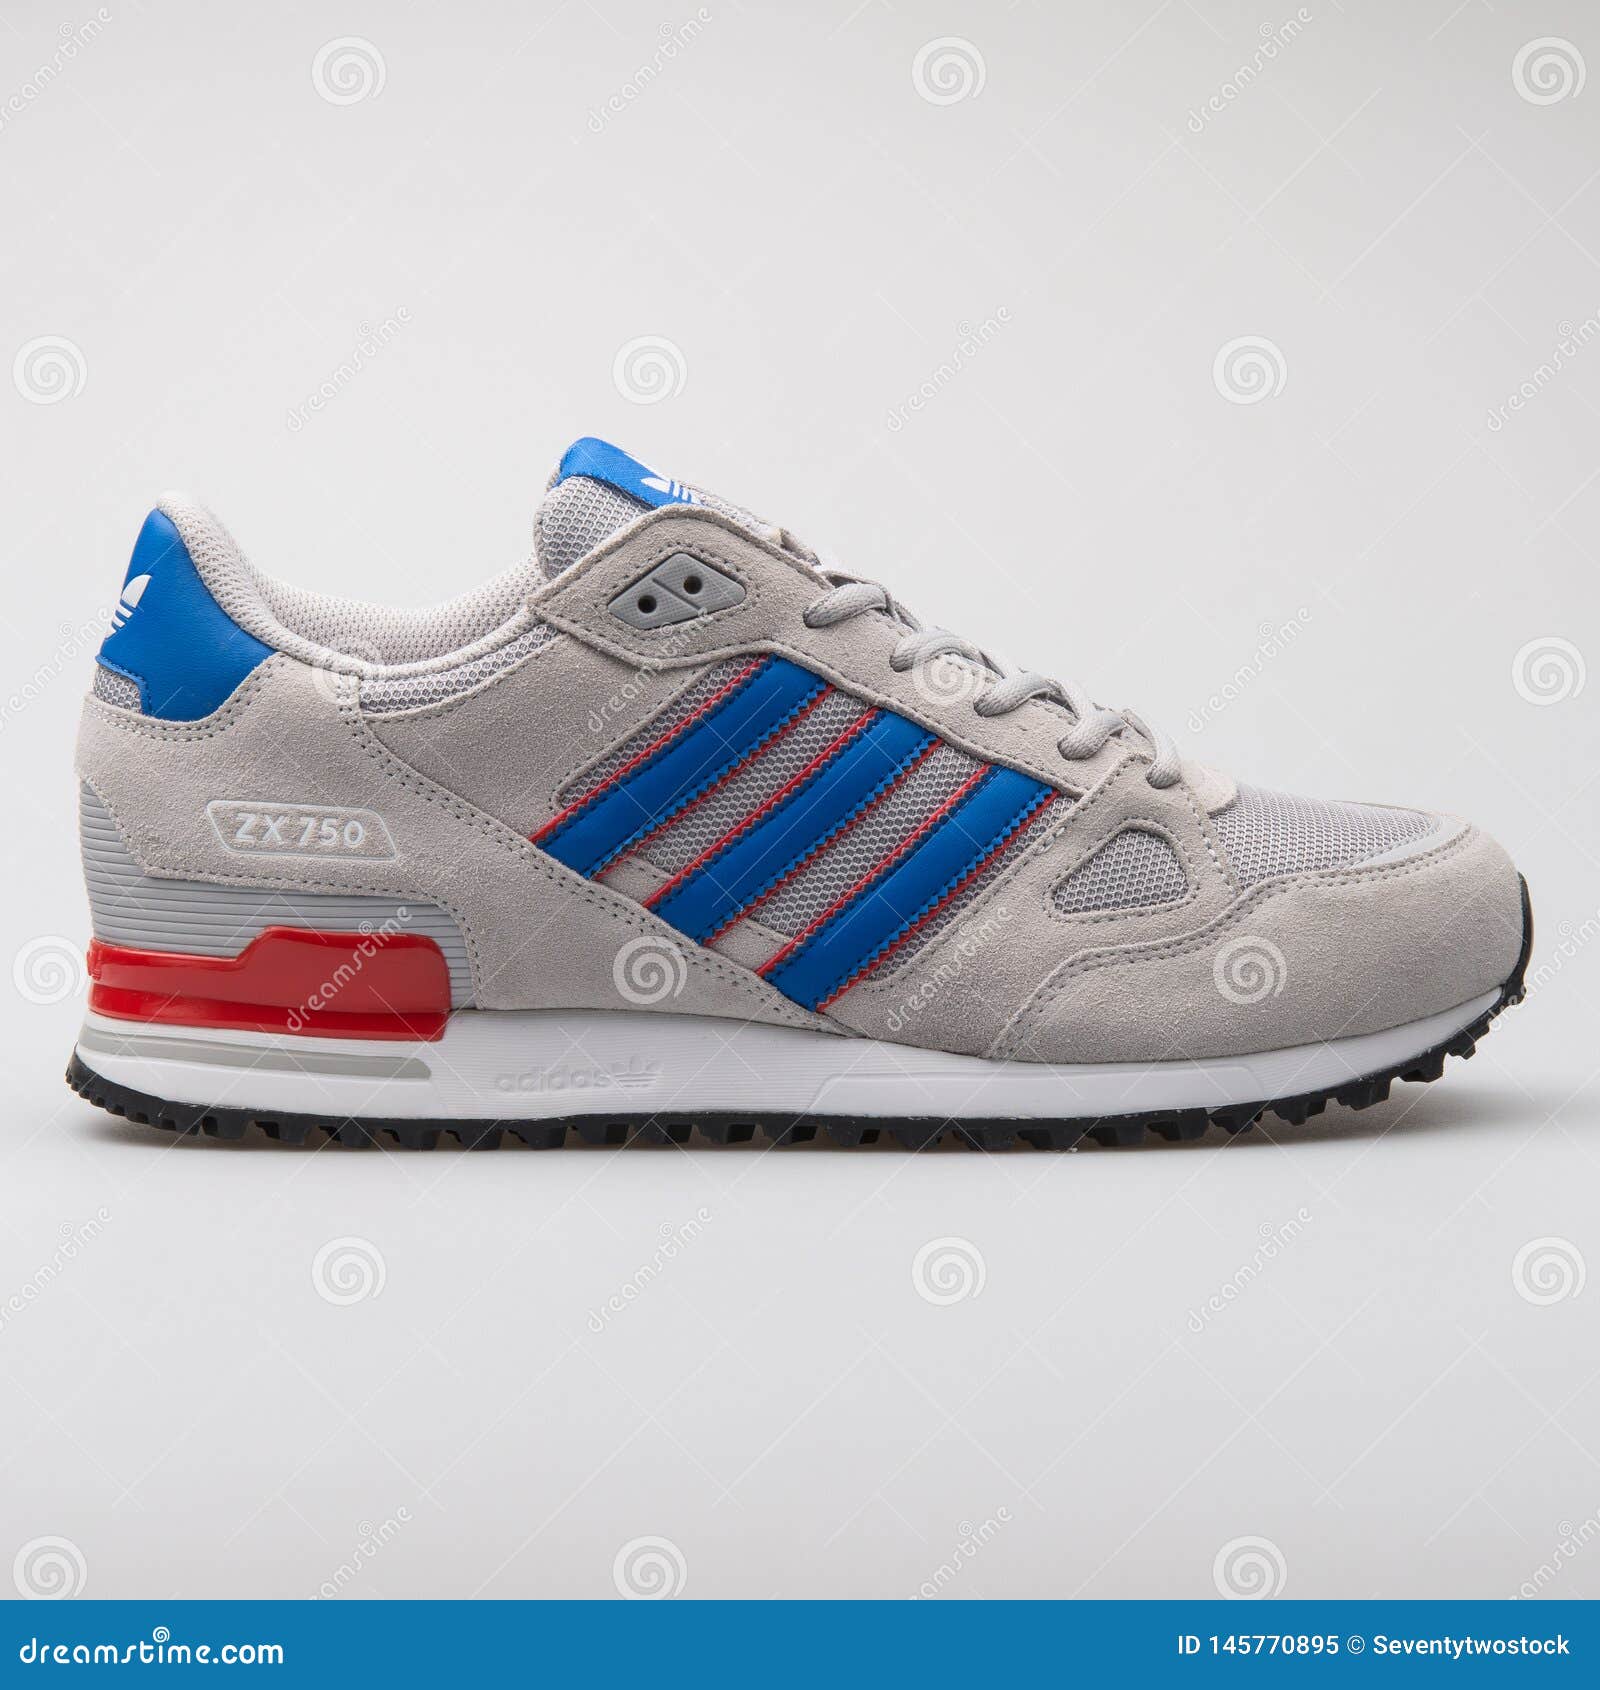 Adidas ZX750 Grey, Blue and Sneaker Image Image of exercise, product: 145770895